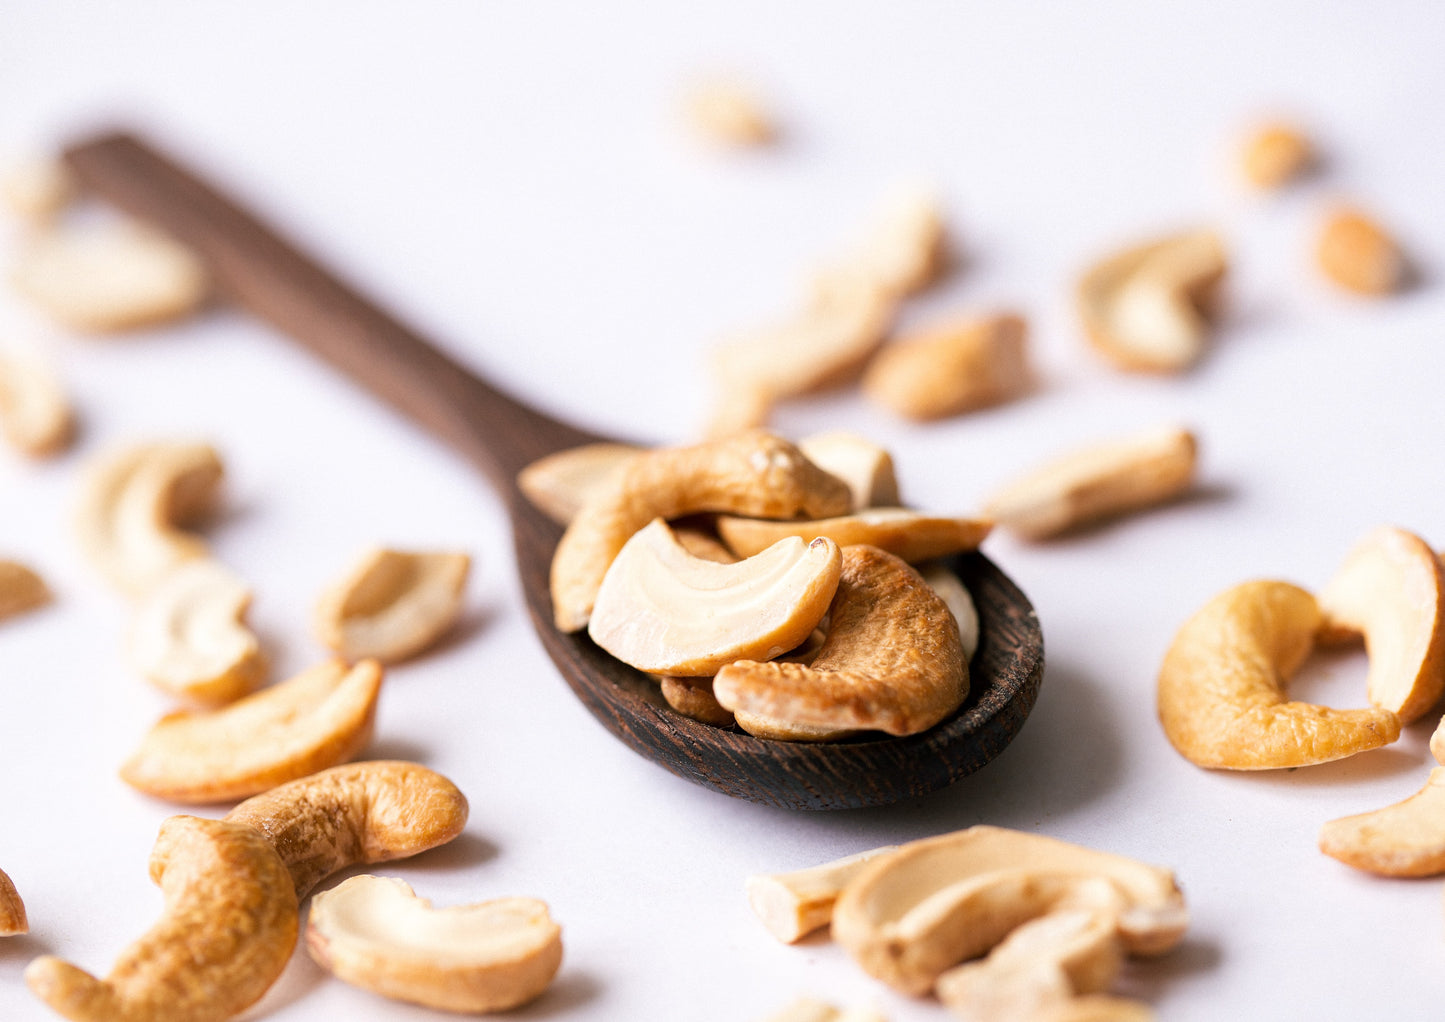 Organic Dry Roasted Cashew Halves and Pieces – Unsalted, Non-GMO, Vegan-Friendly, Perfect Snack for Anytime! - No Chemicals or Artificial Ingredients - Rich in Nutrients & Tasty